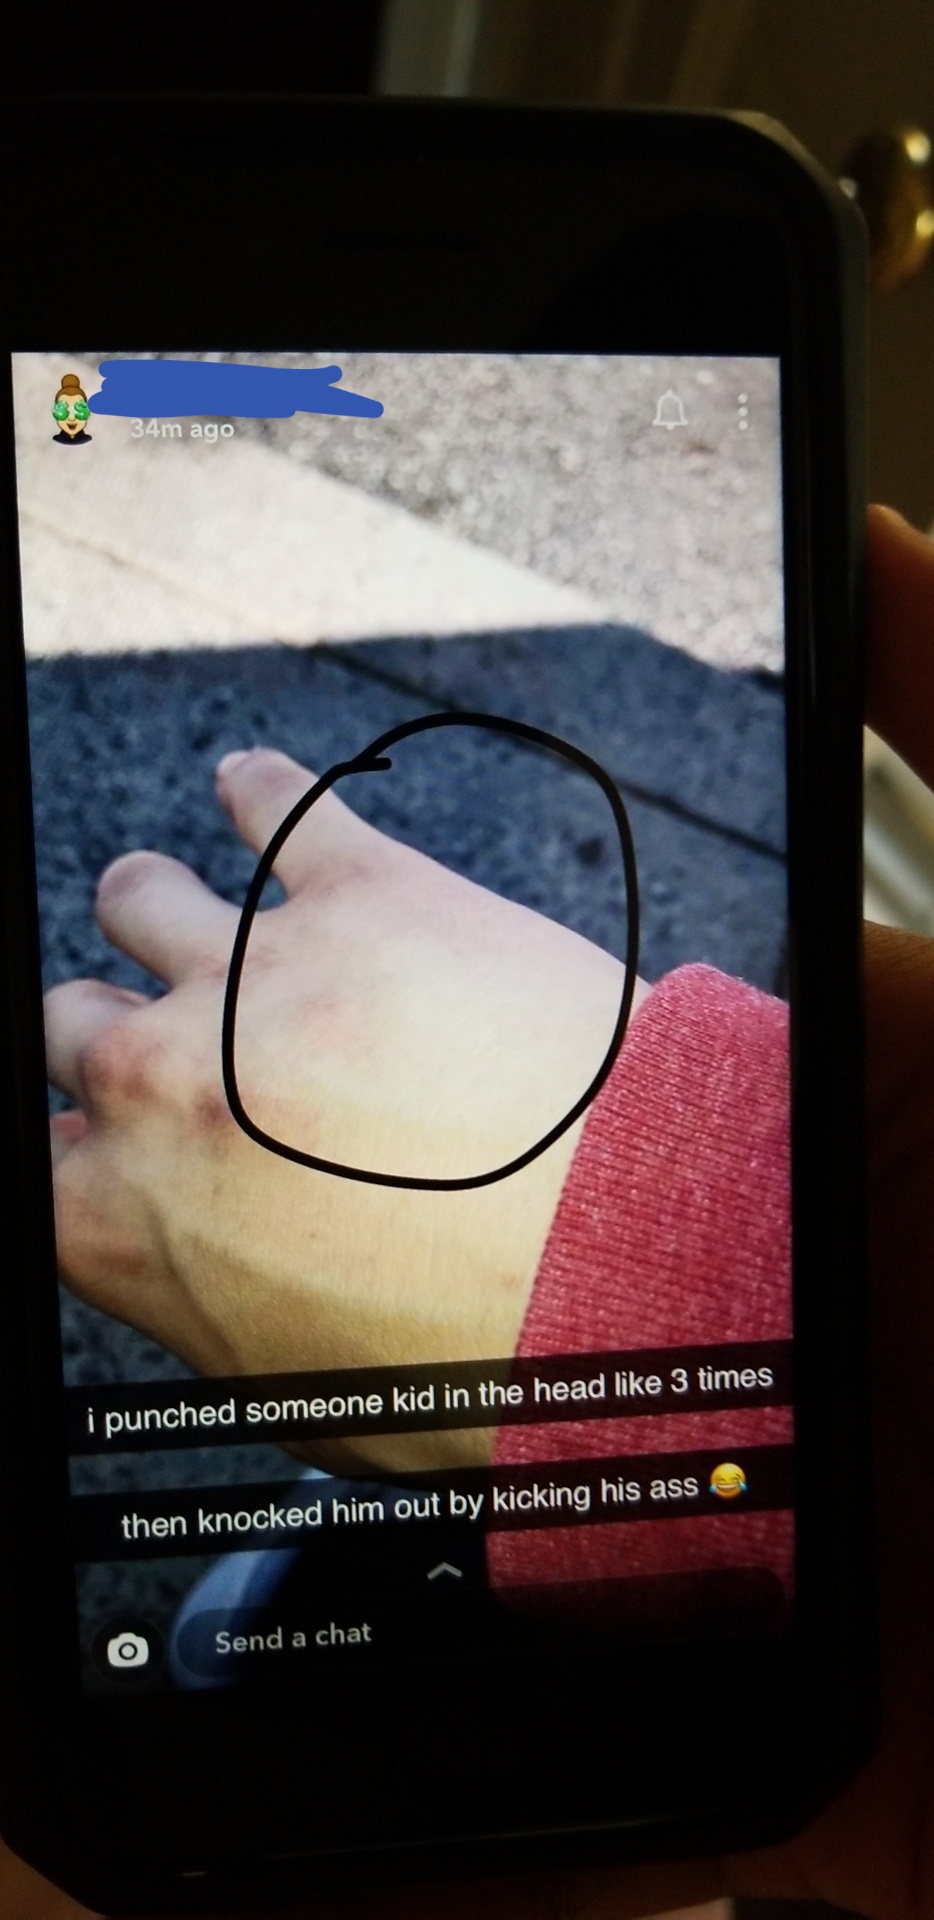 smartphone - 34m ago i punched someone kid in the head 3 times then knocked him out by kicking his ass Send a chat